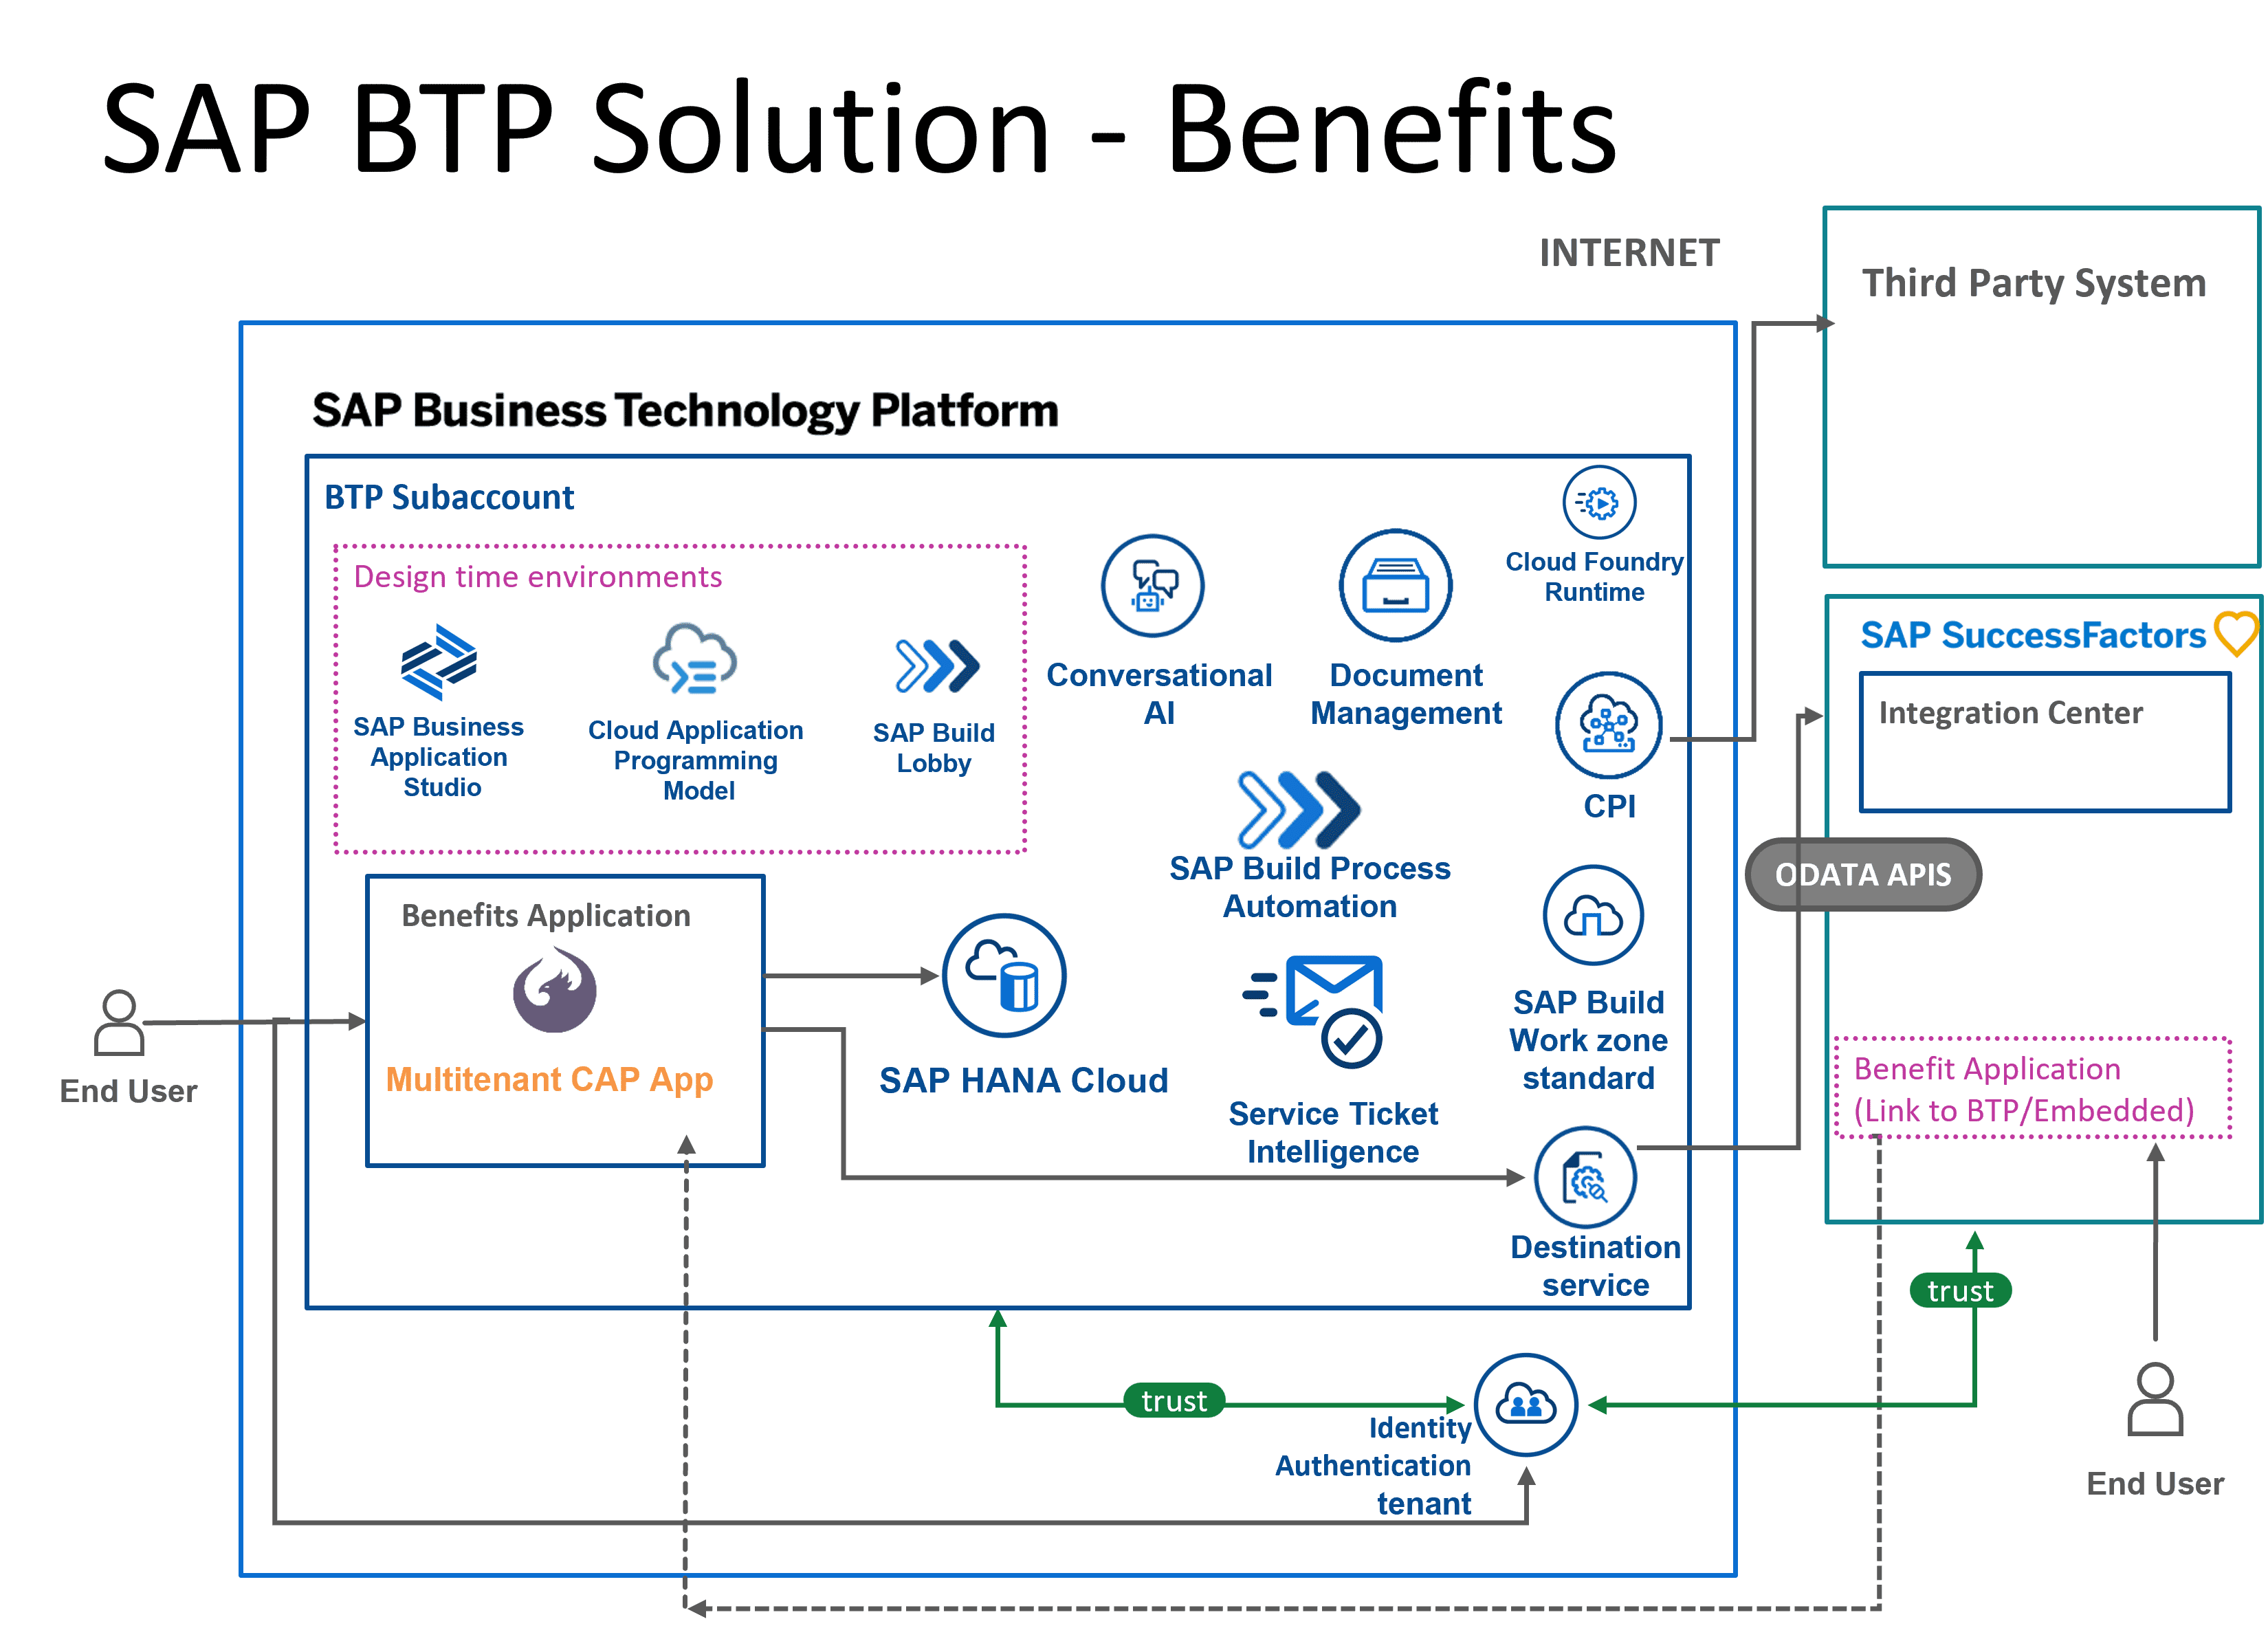 Architectural Diagram Why Flexibility, Configurability & Extensibility matter for Benefits Administration?